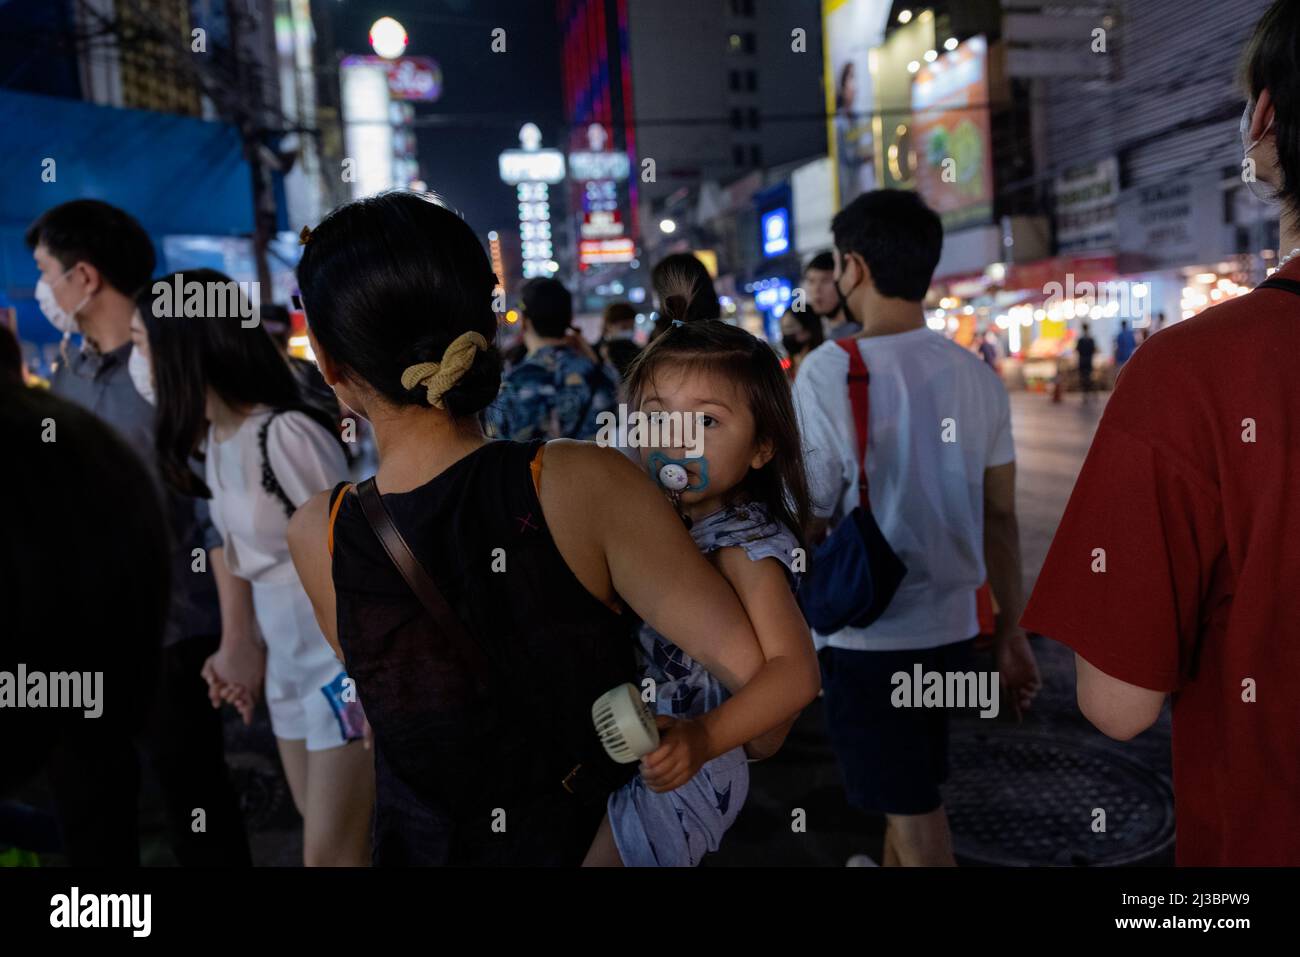 Mother and daughter among group of pedestrians Stock Photo